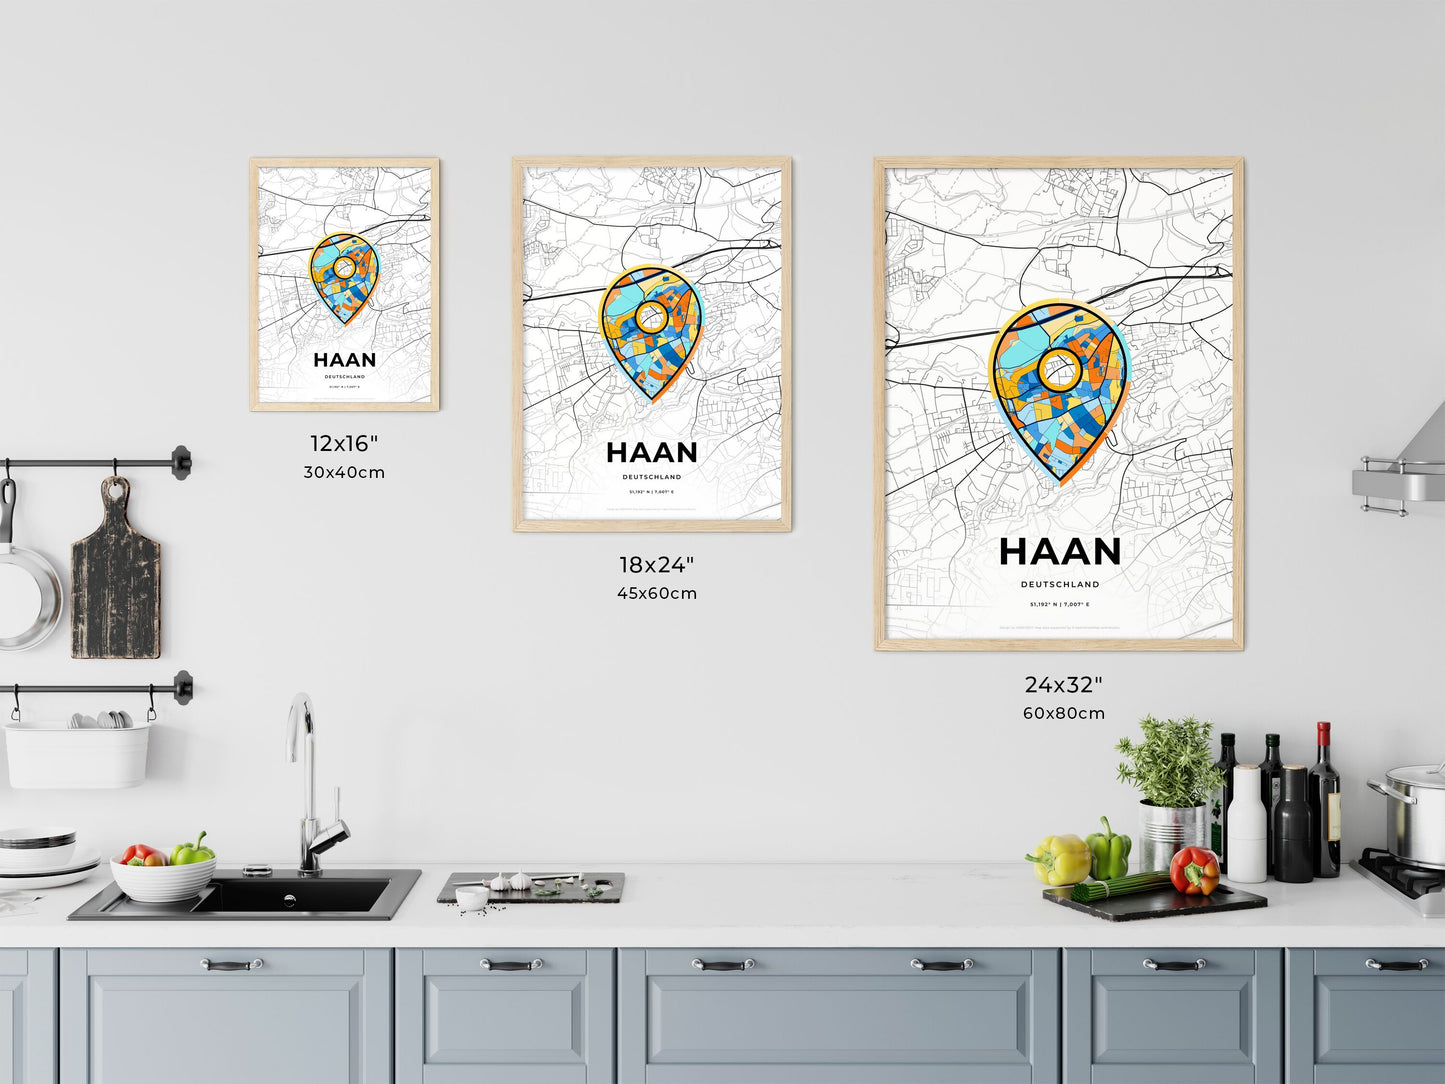 HAAN GERMANY minimal art map with a colorful icon. Where it all began, Couple map gift.